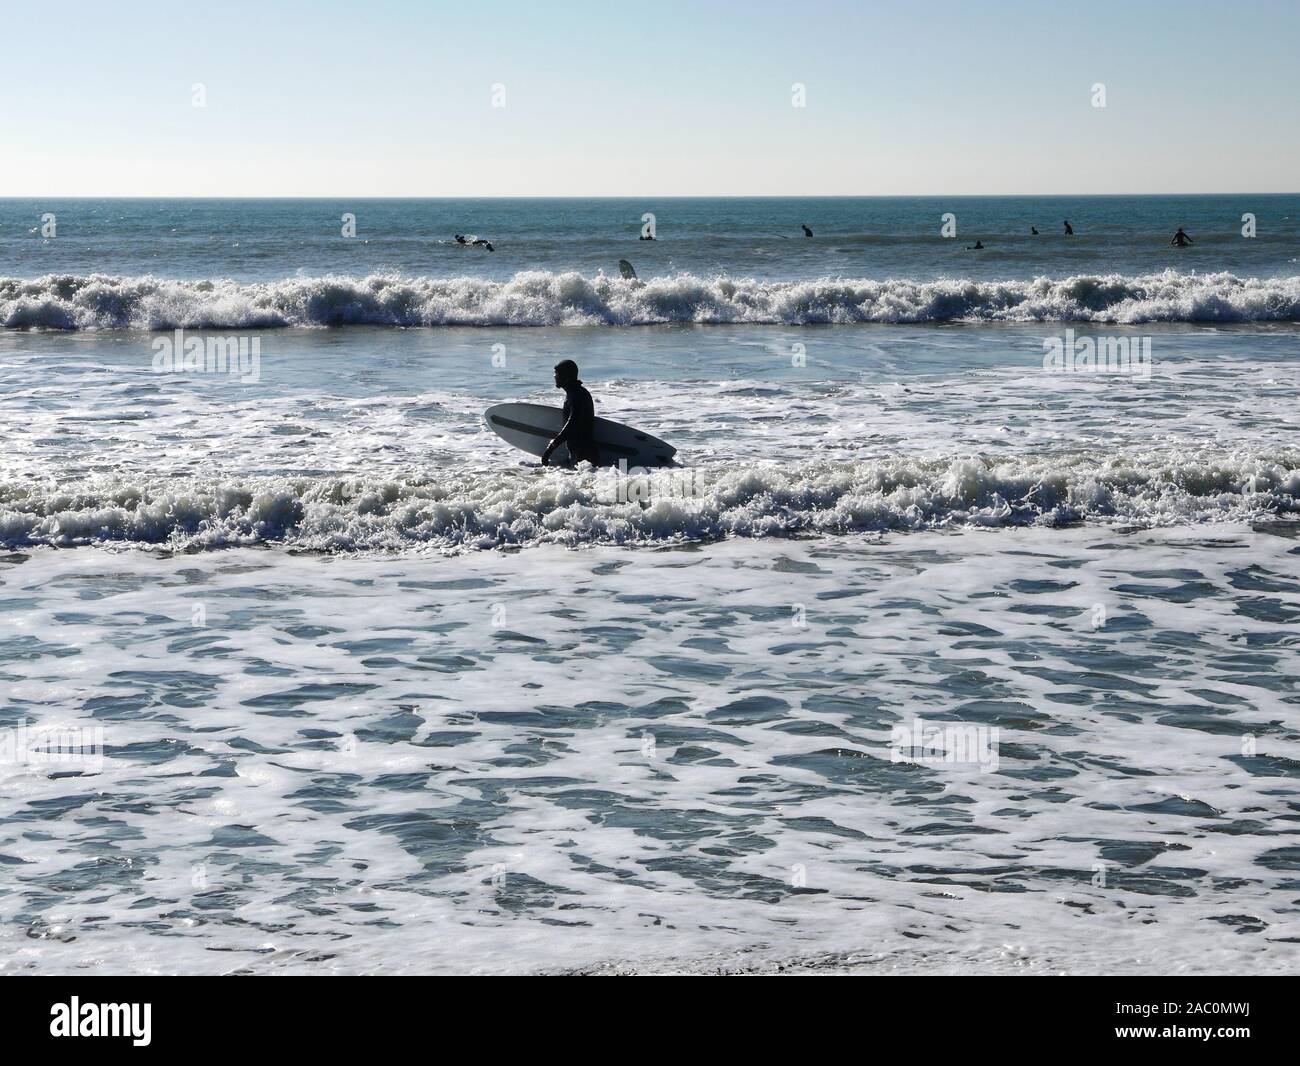 Winter surfing at Selsey beach in February 2019 with a surfer walking in the waves holding his surfboard Stock Photo